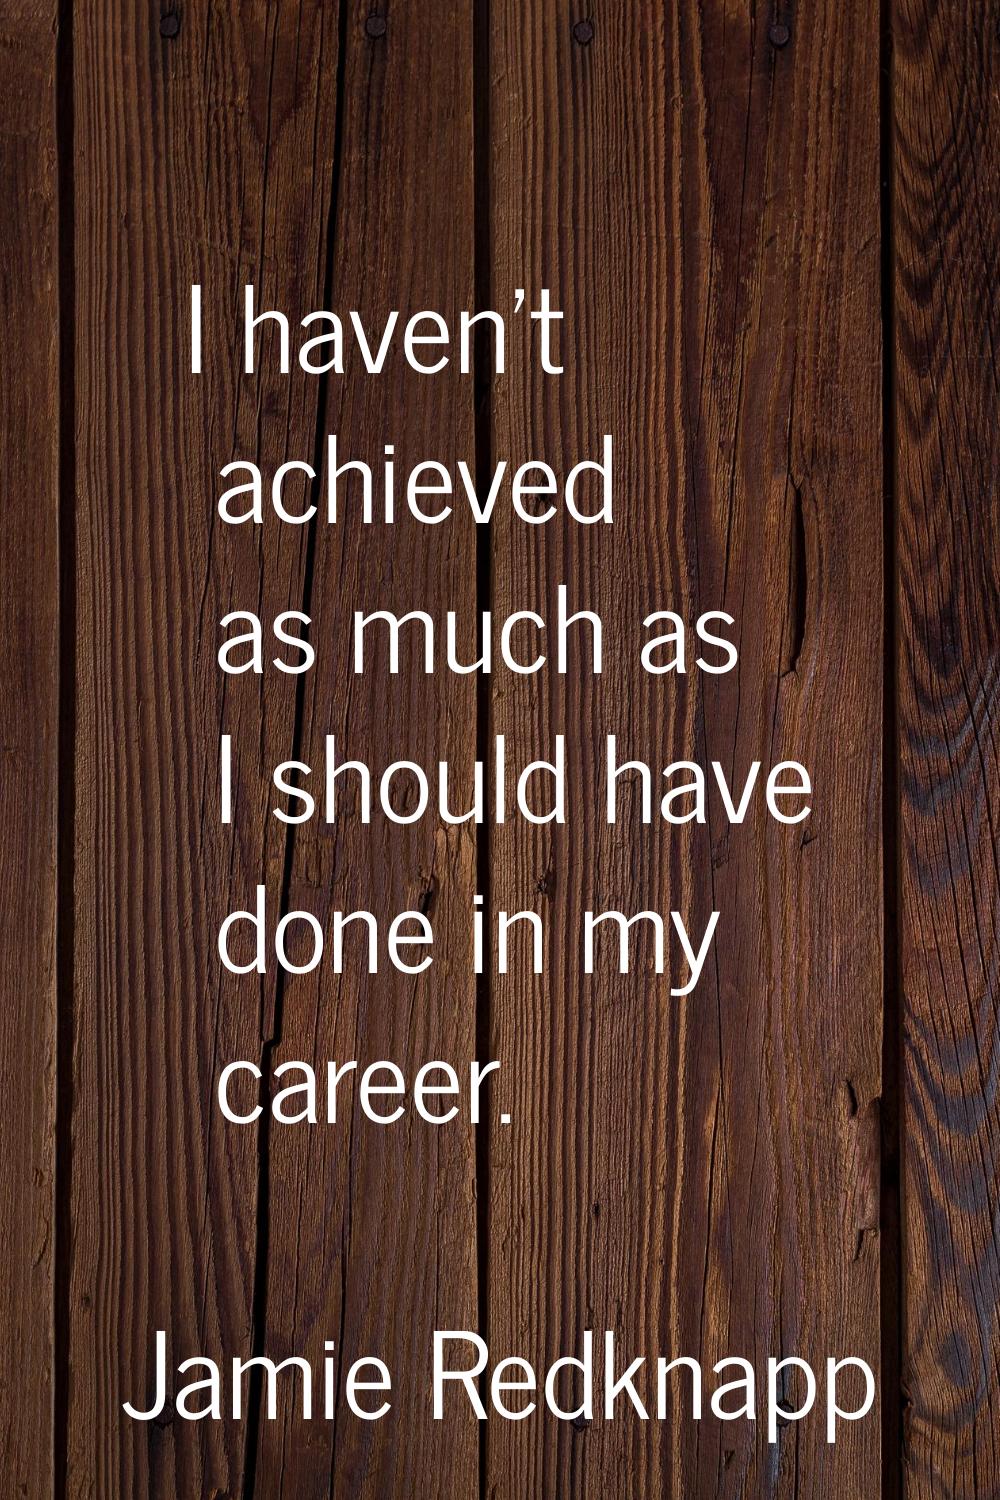 I haven't achieved as much as I should have done in my career.